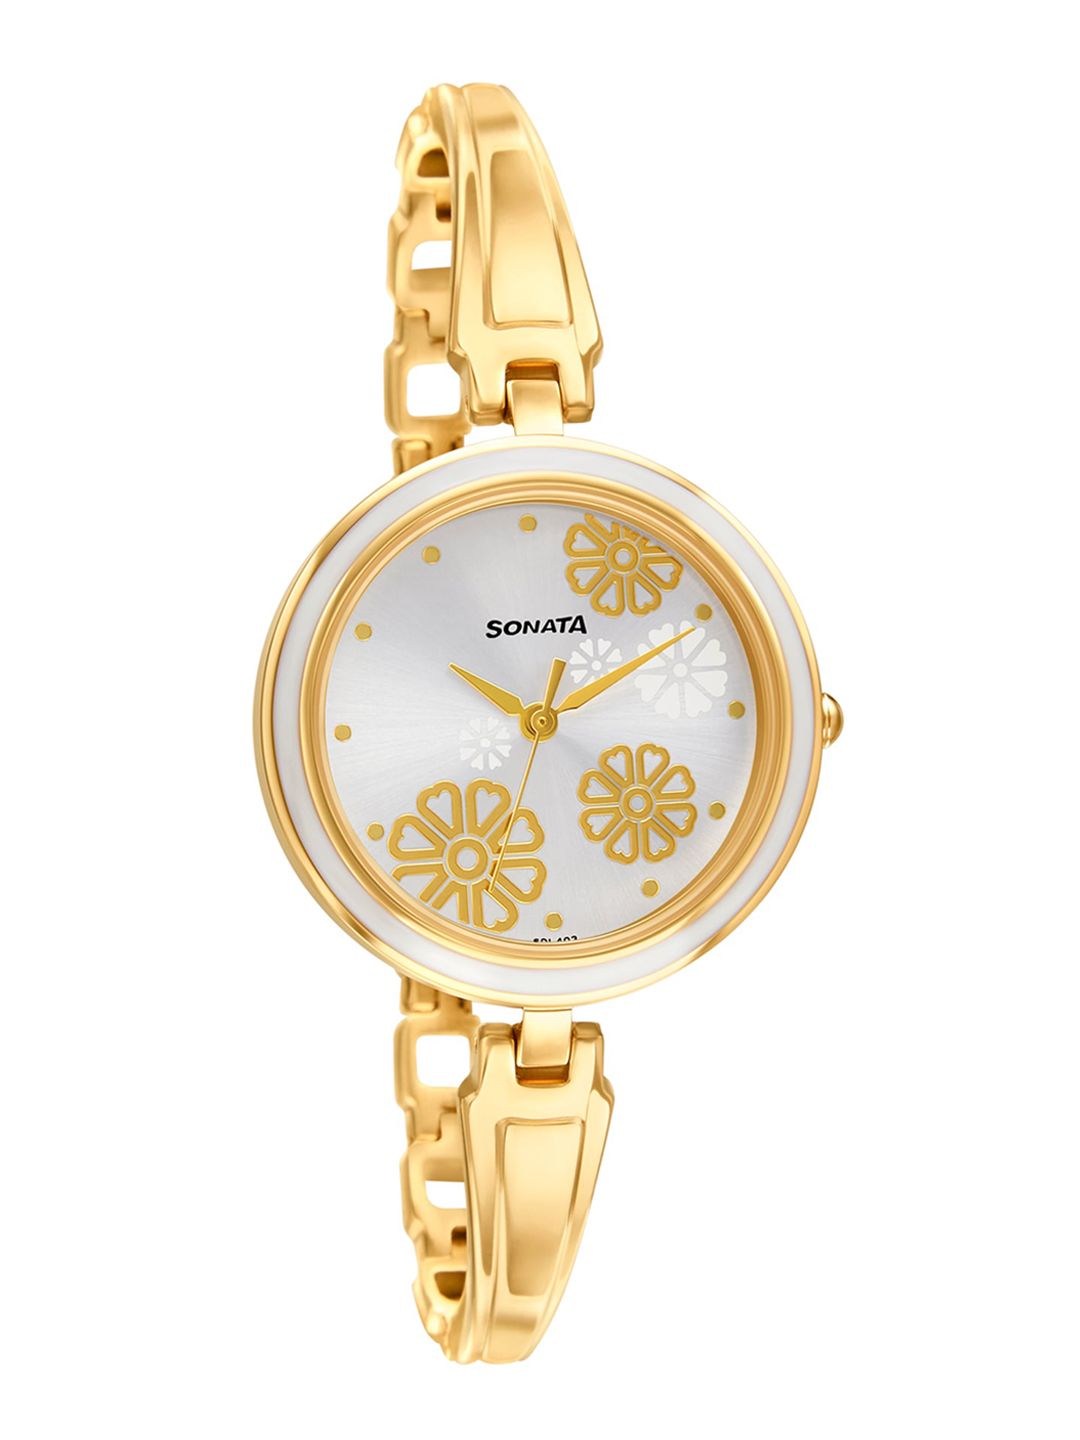 Sonata Women Gold-Toned Analogue Watch 8166YM01-Silver Price in India